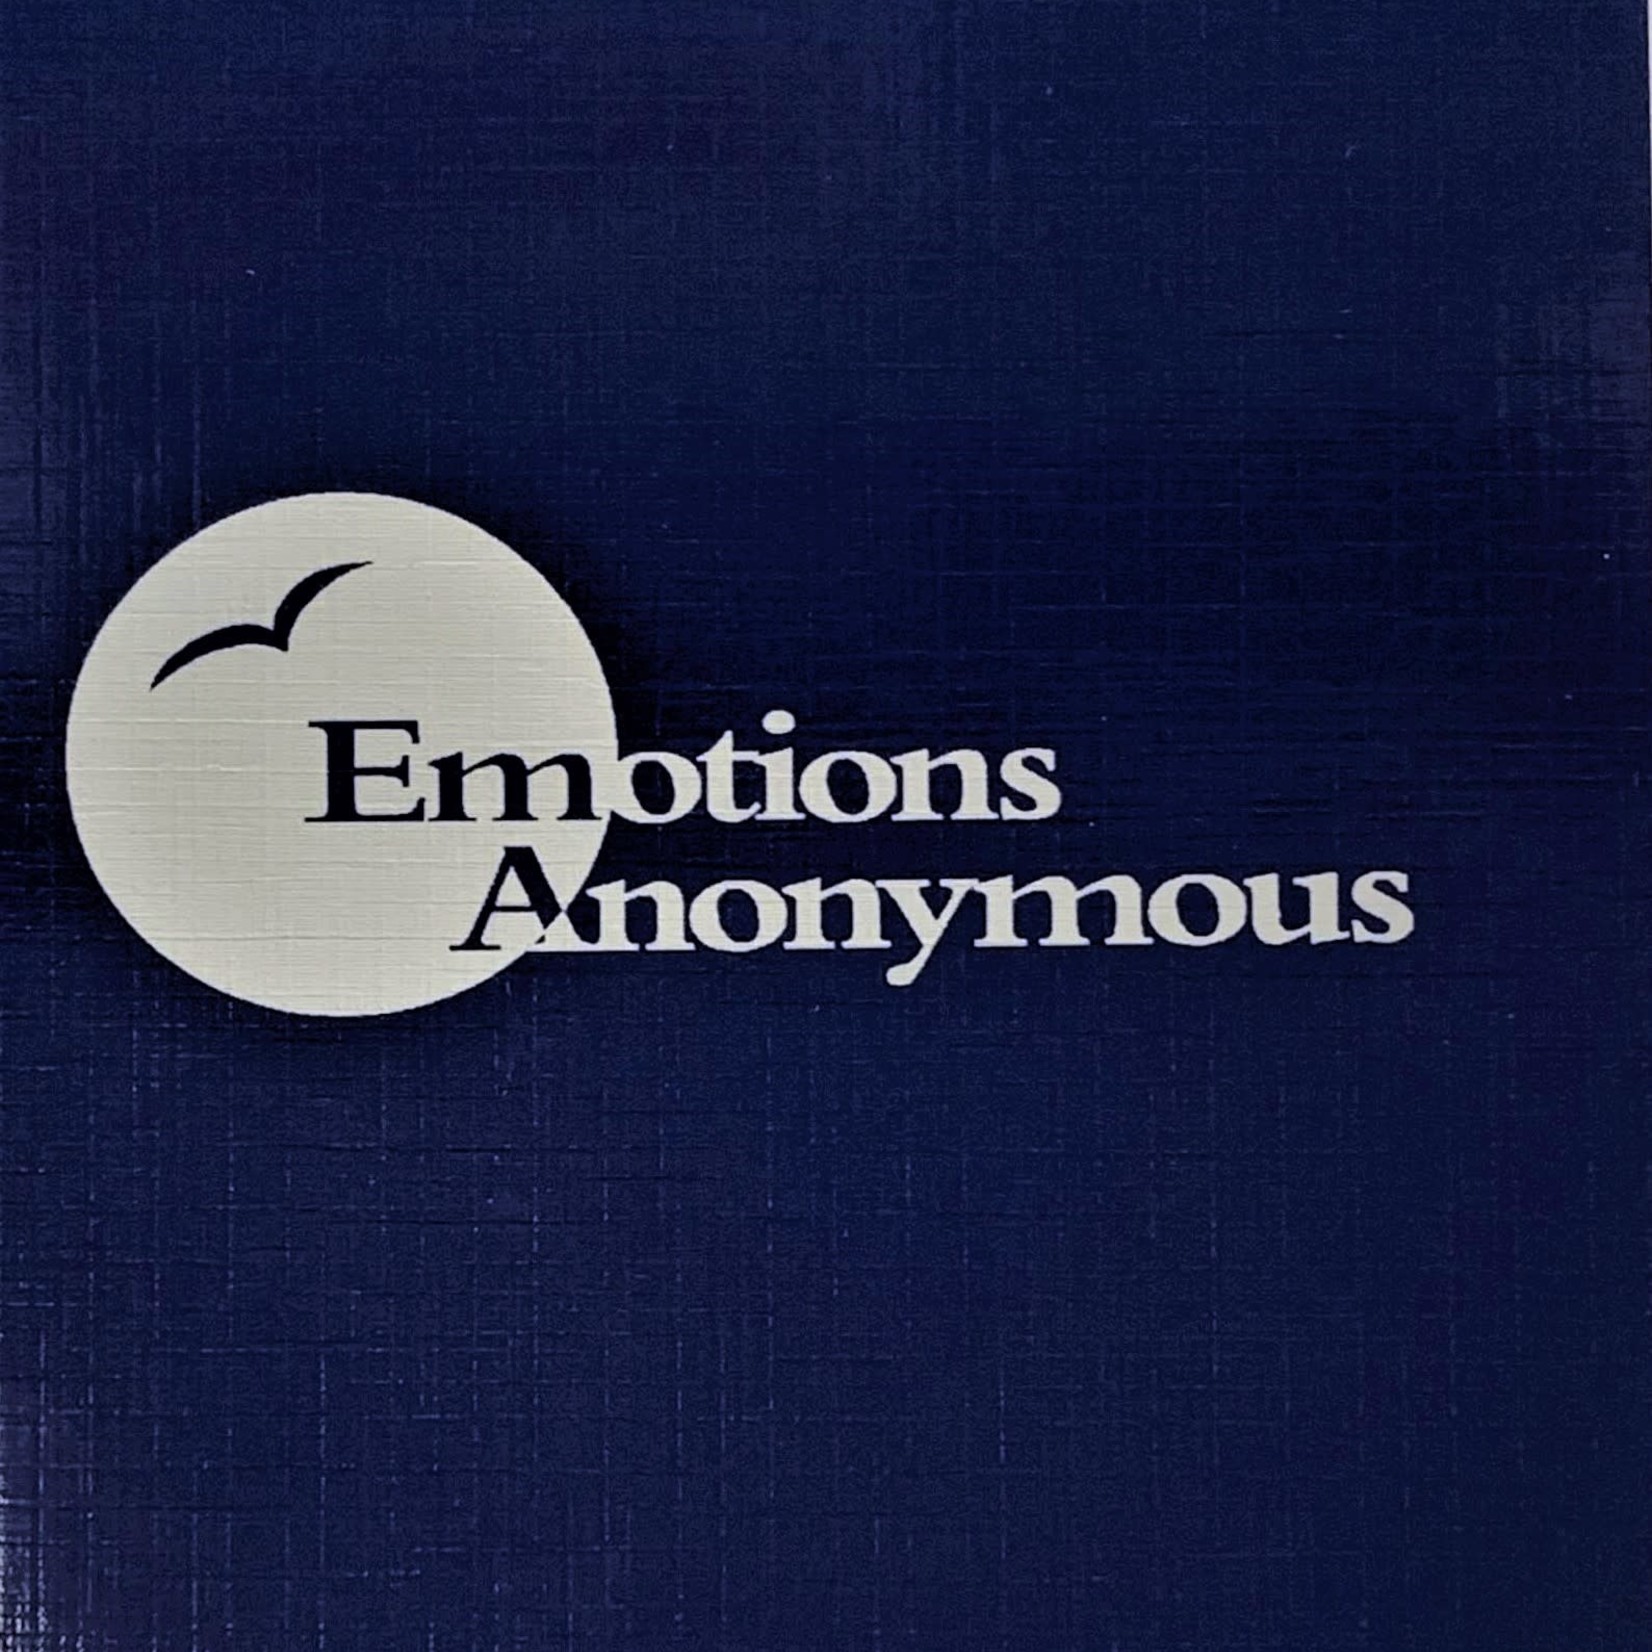 Emotions Anonymous [Paperback]